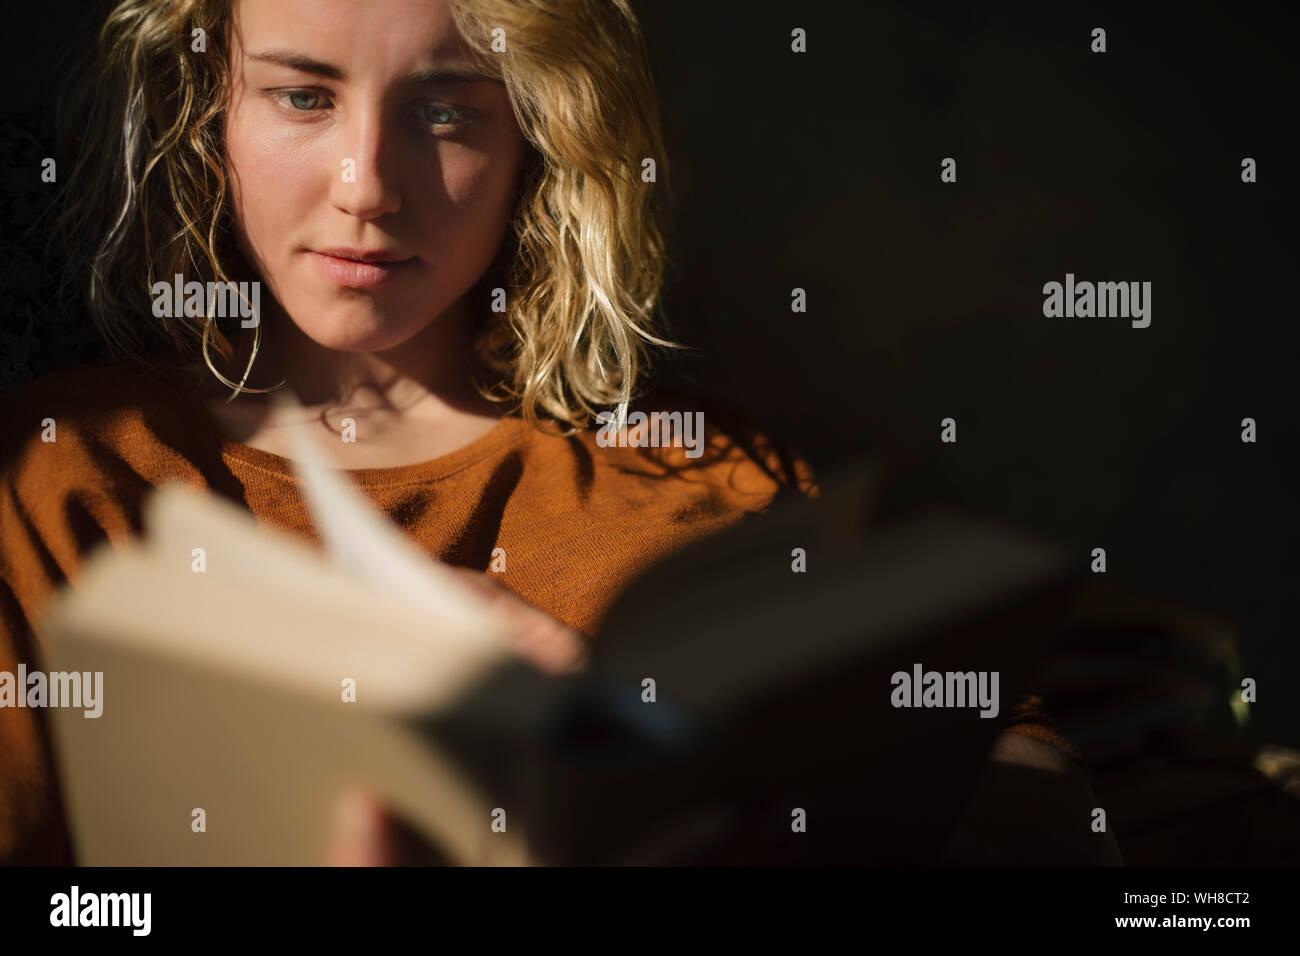 Blond young woman reading a book Stock Photo